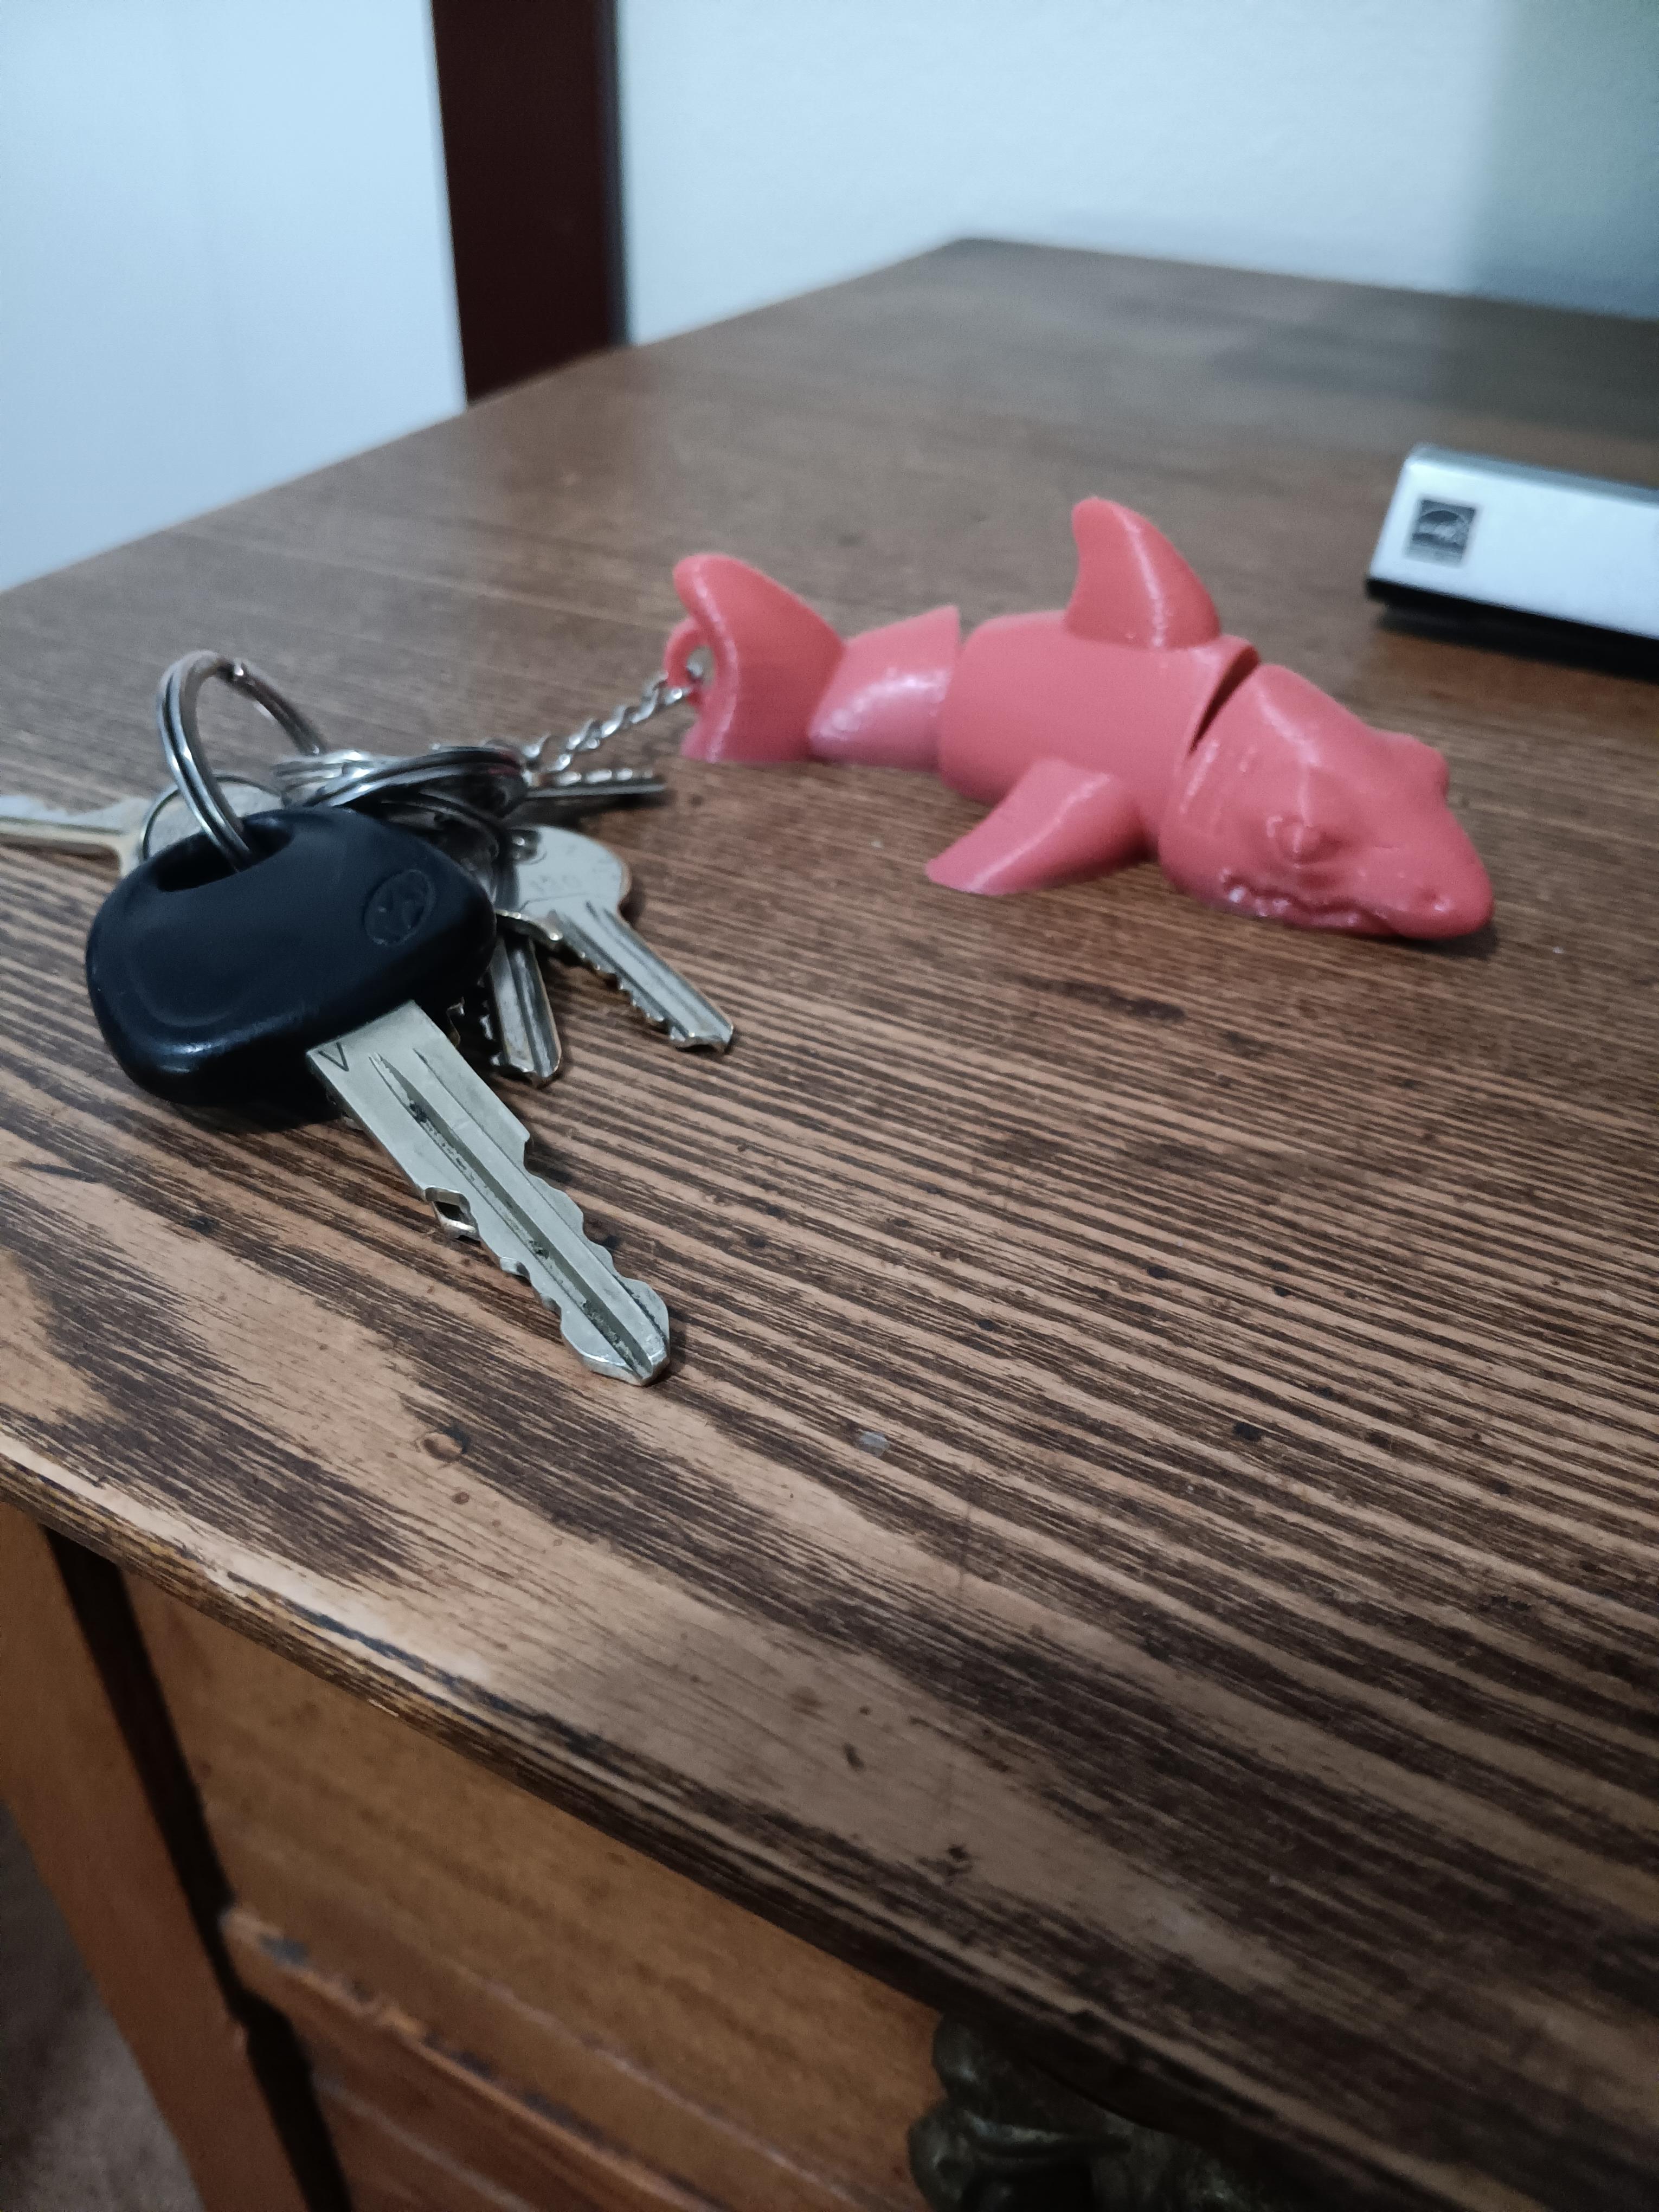 Flexi Shark key chain - articulated - print in place  3d model